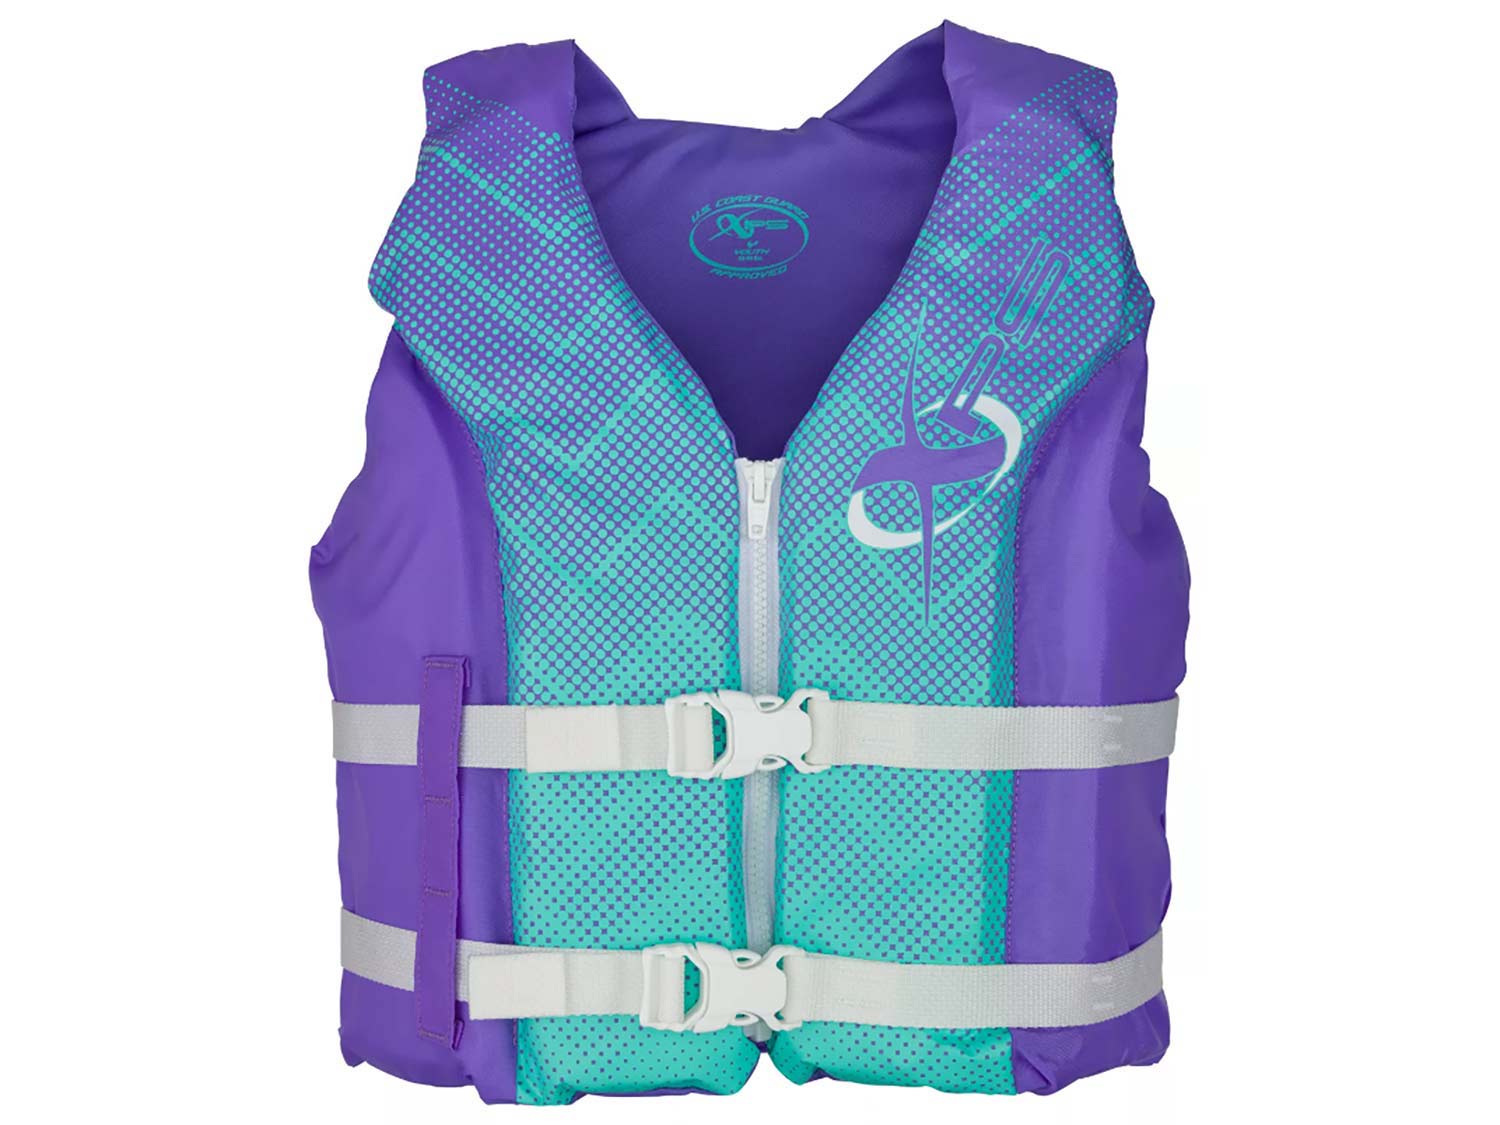 XPS Deluxe Hinged Life Jacket for Kids